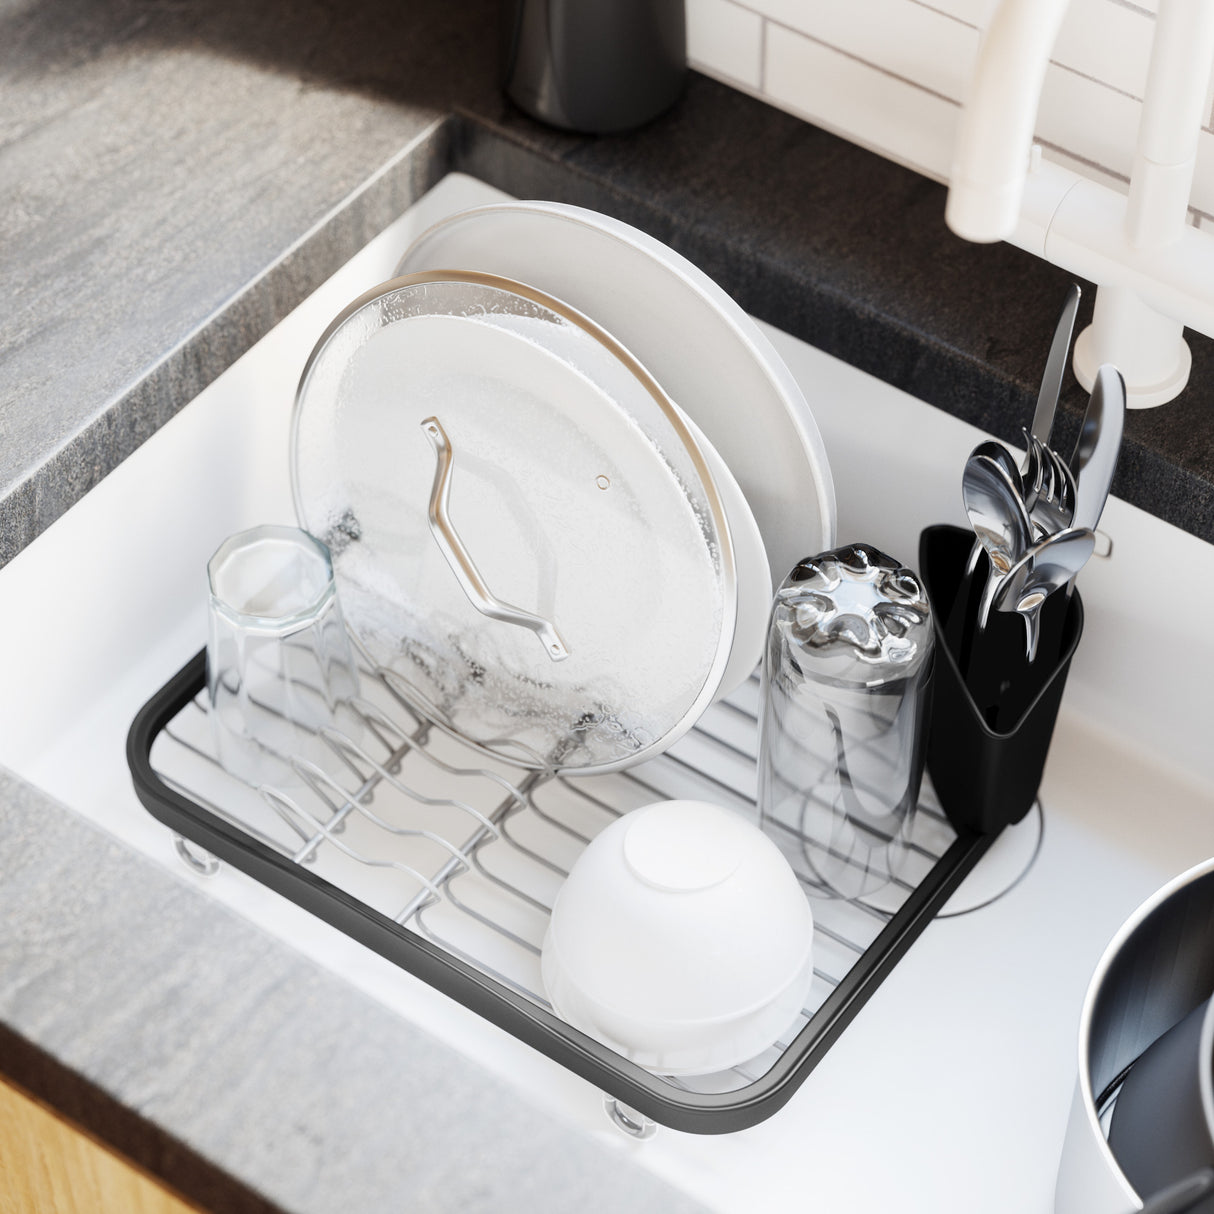 Mini Dish Drying Sink Rack Kitchen Small Dish Drainer Rack with Removable  Drip Tray - Metal Anti Rust Counter Drain Dryer Racks